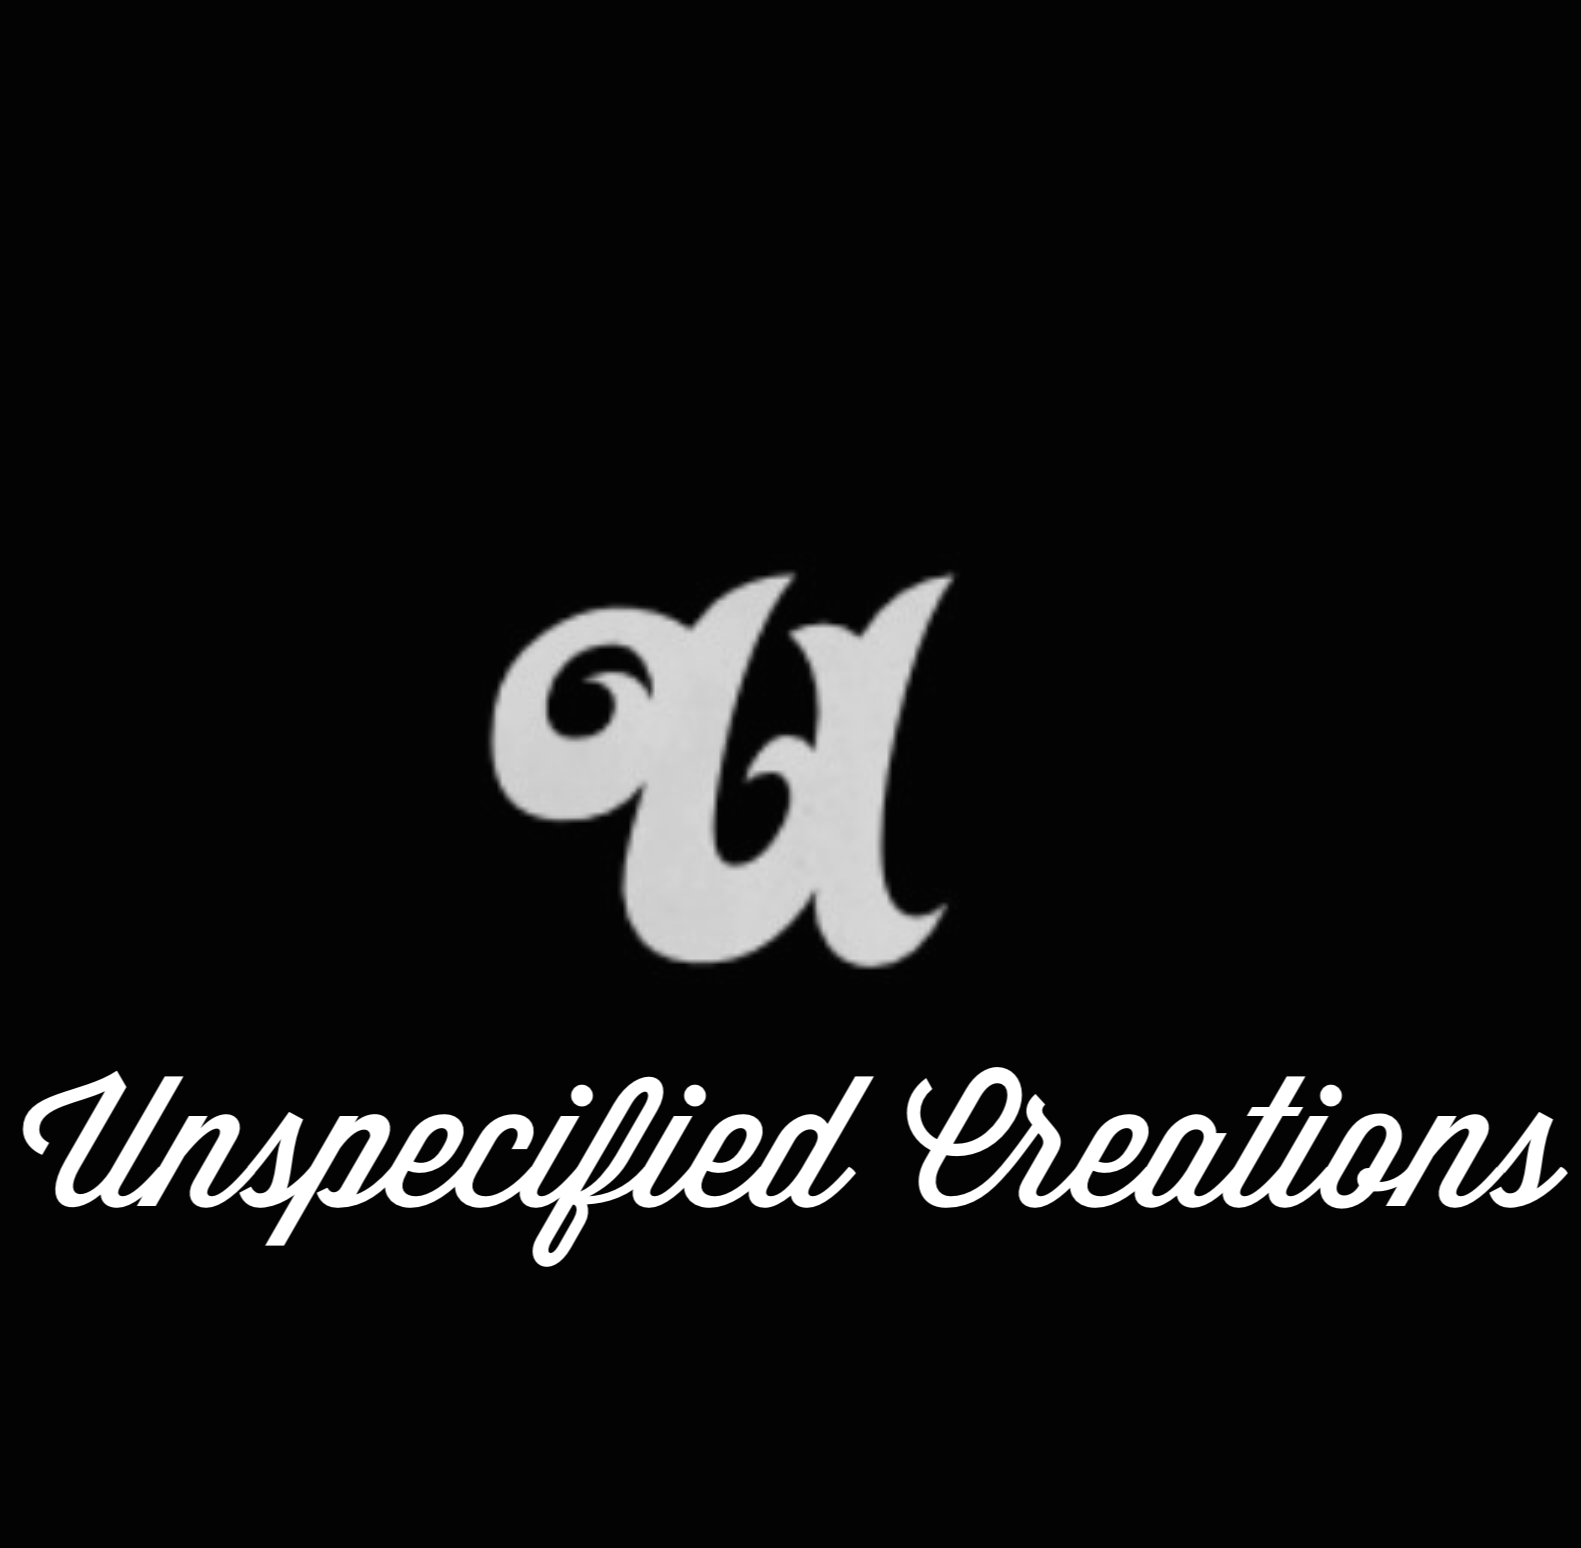 Unspecified Creations